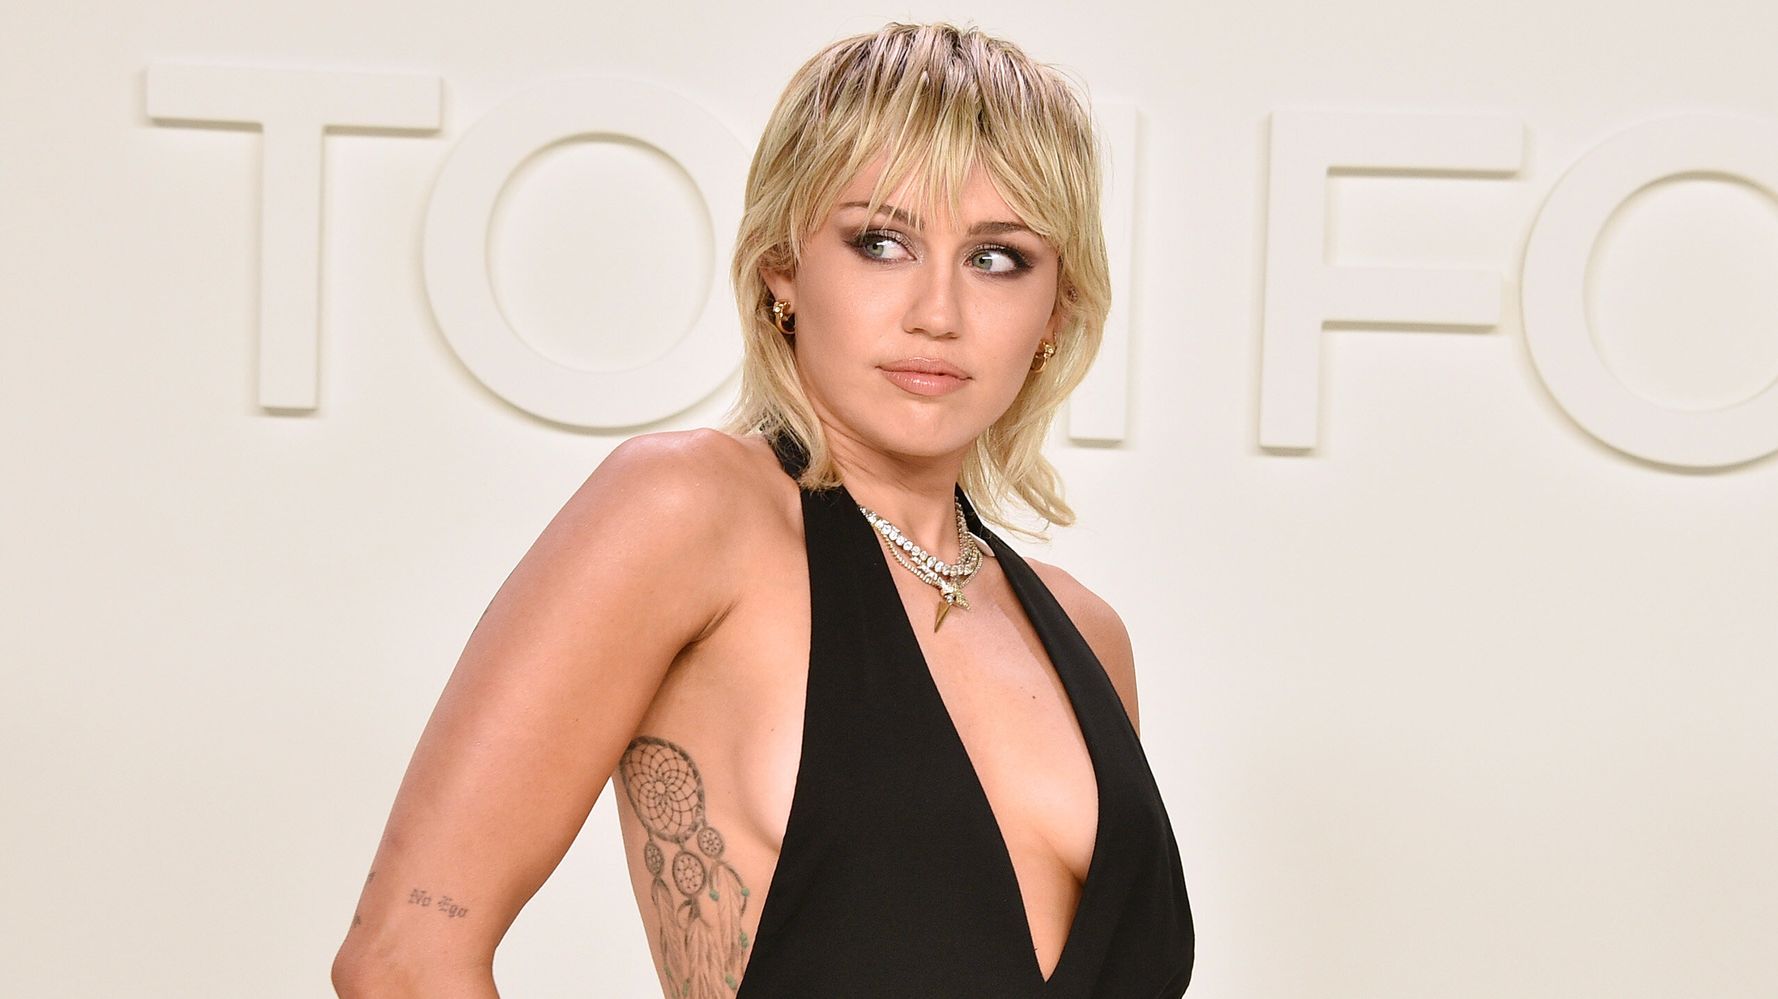 Miley Cyrus Was Either ‘Chased Down’ By UFO Or Had Too Much ‘Weed Wax’